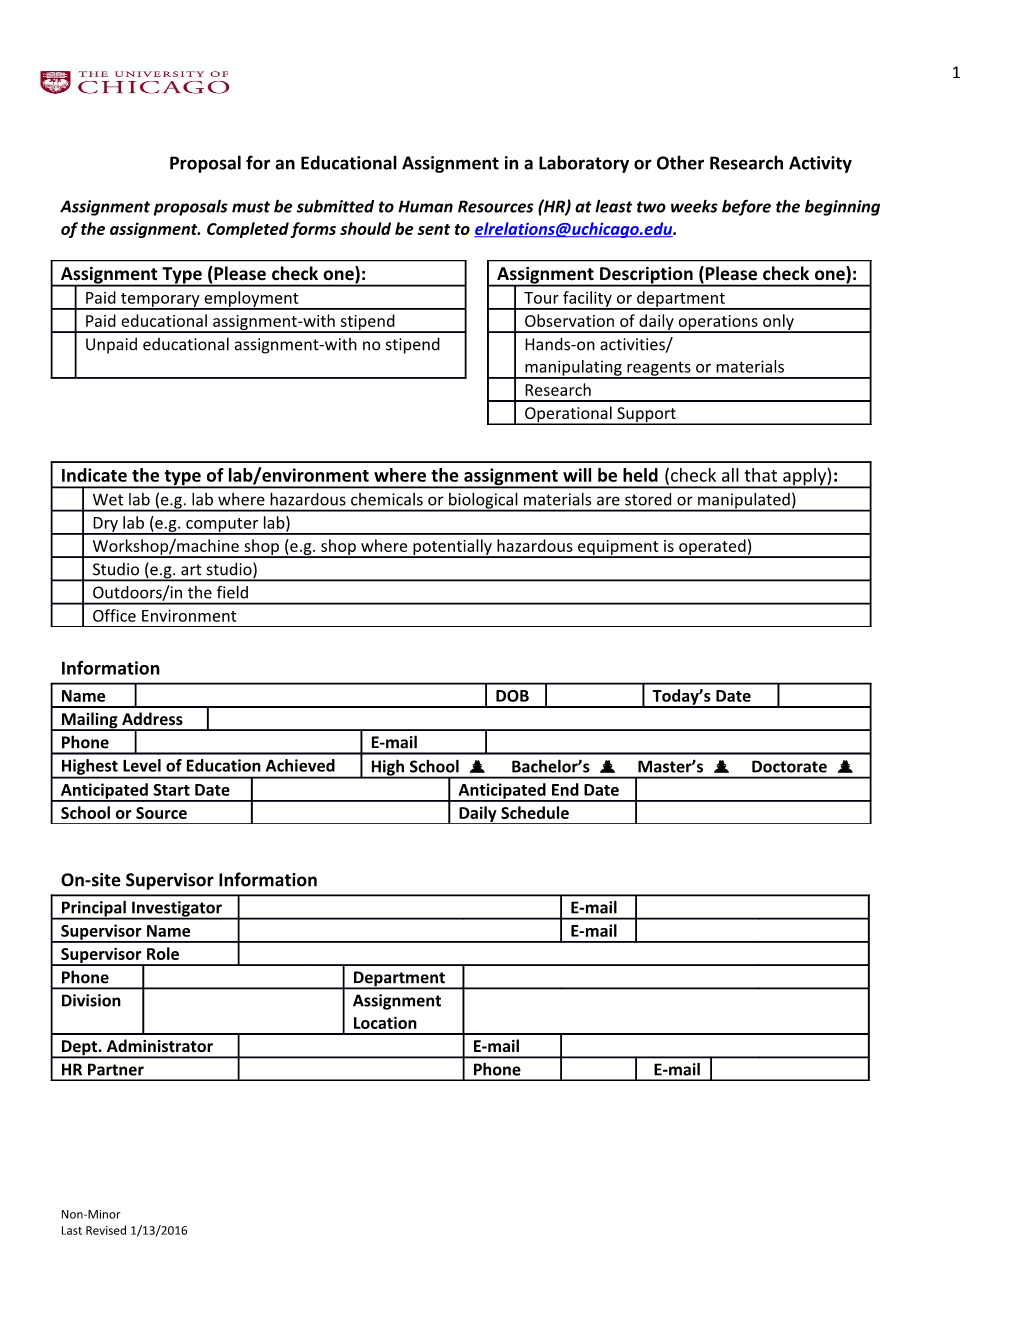 Proposal for an Educational Assignmentin a Laboratory Or Other Research Activity